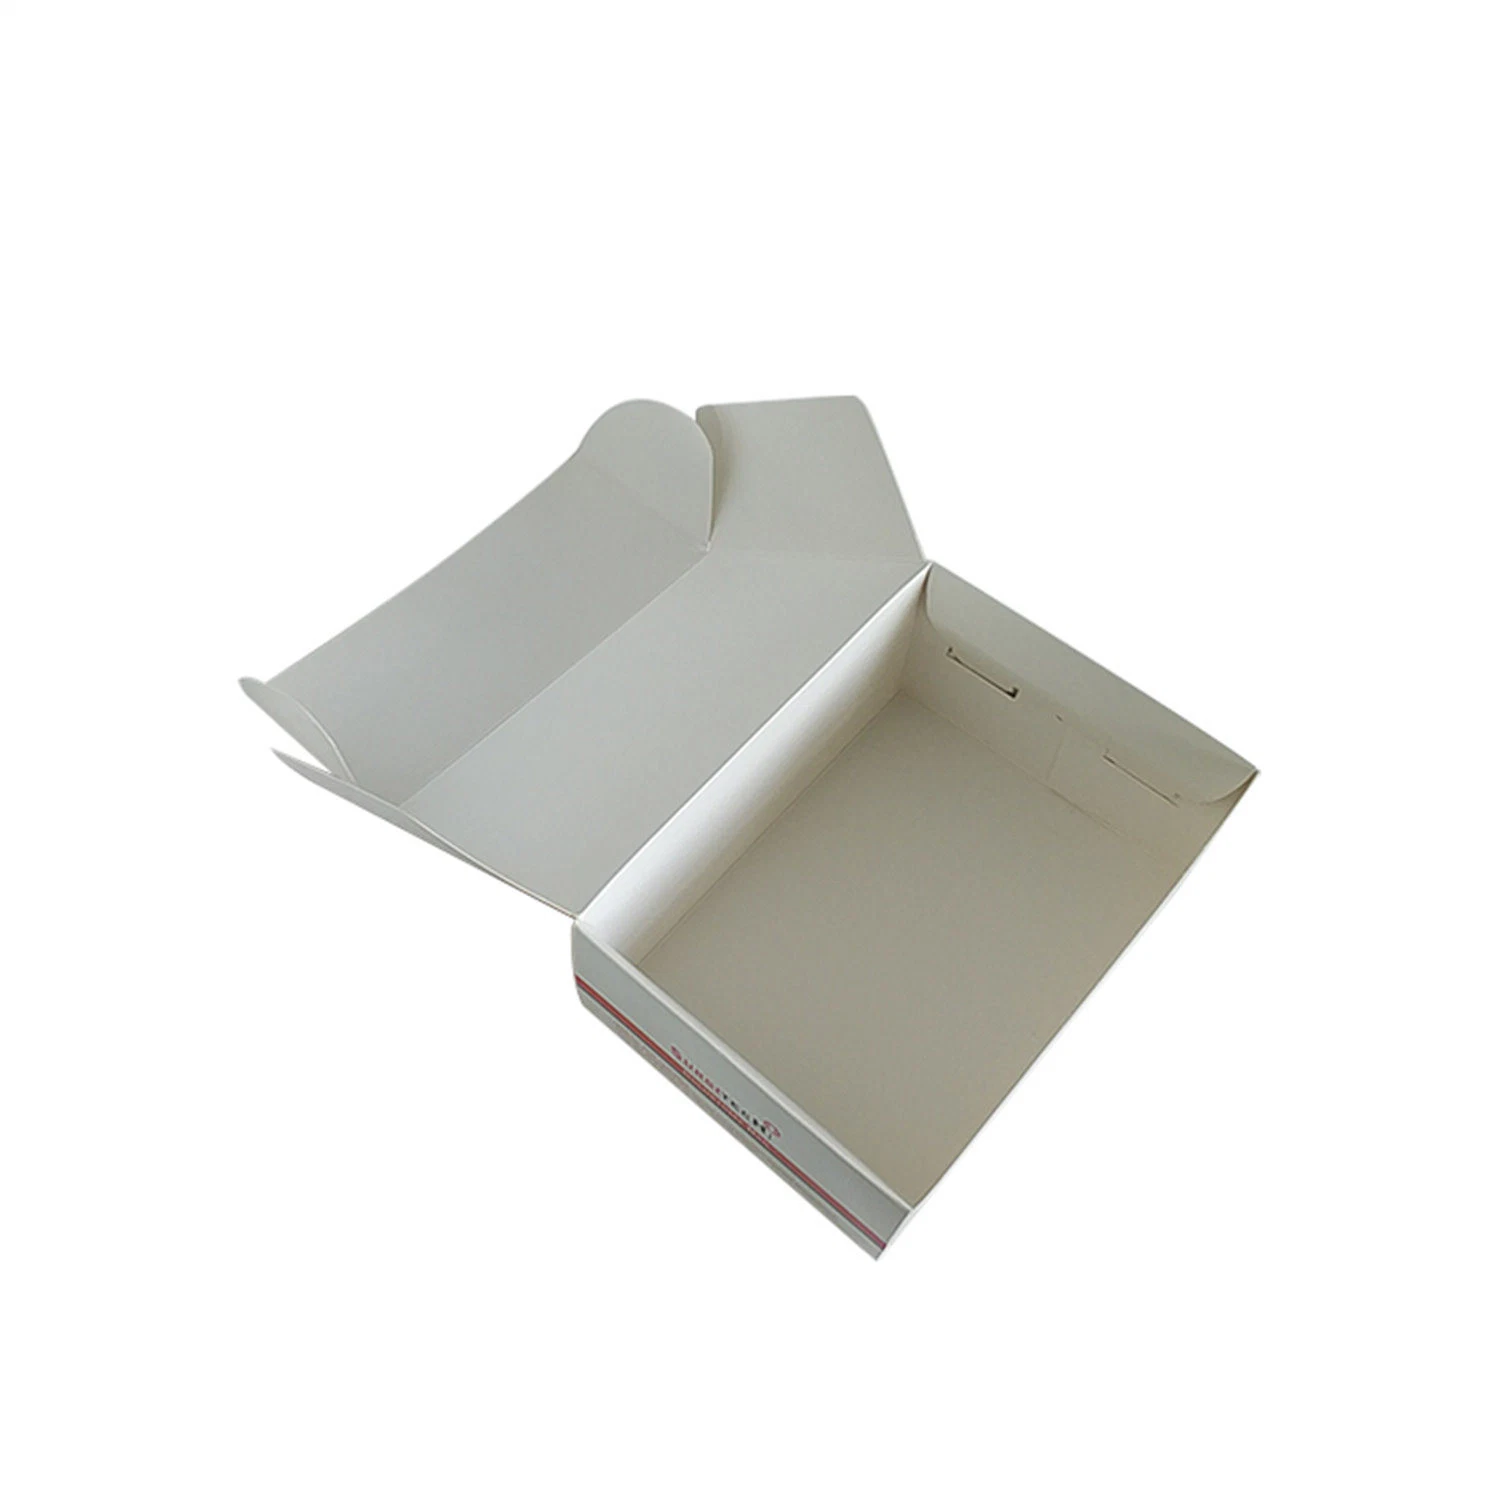 Packaging Custom White Cardboard Boxes Aircraft Boxes Medical Boxes, Food Boxes